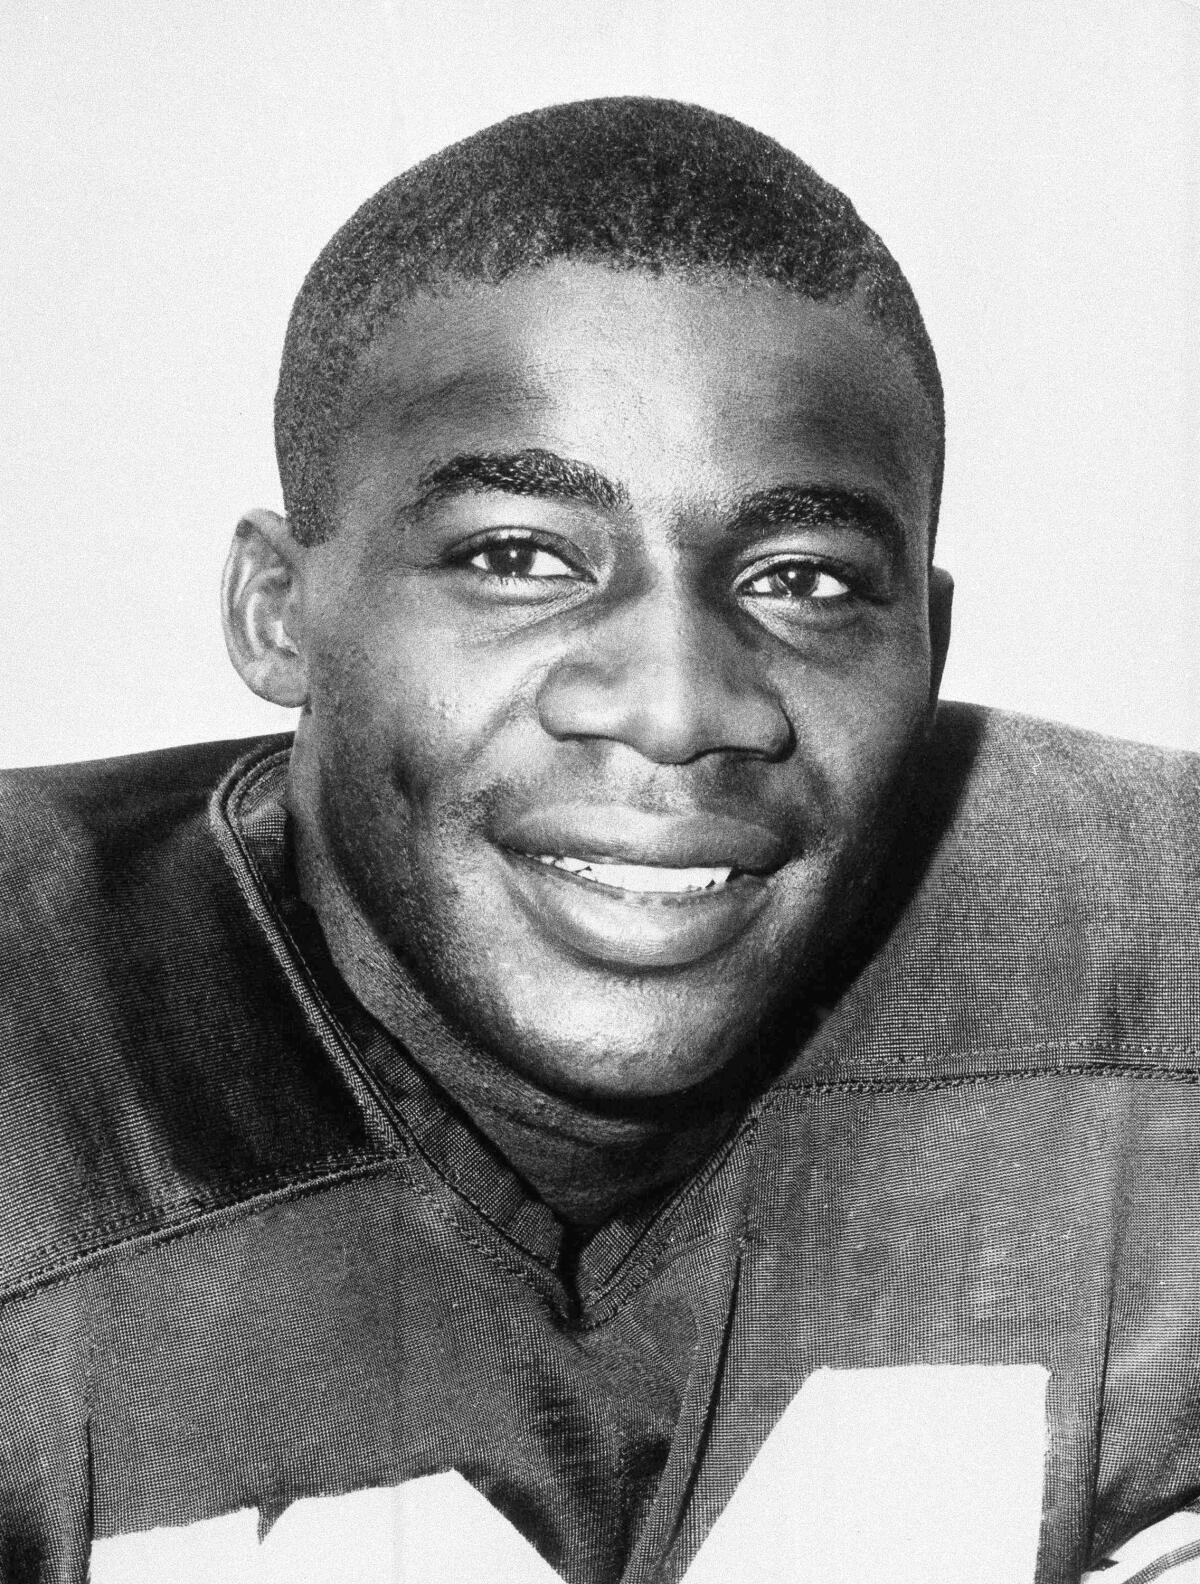 Willie Wood in 1959 while with the Green Bay Packers.